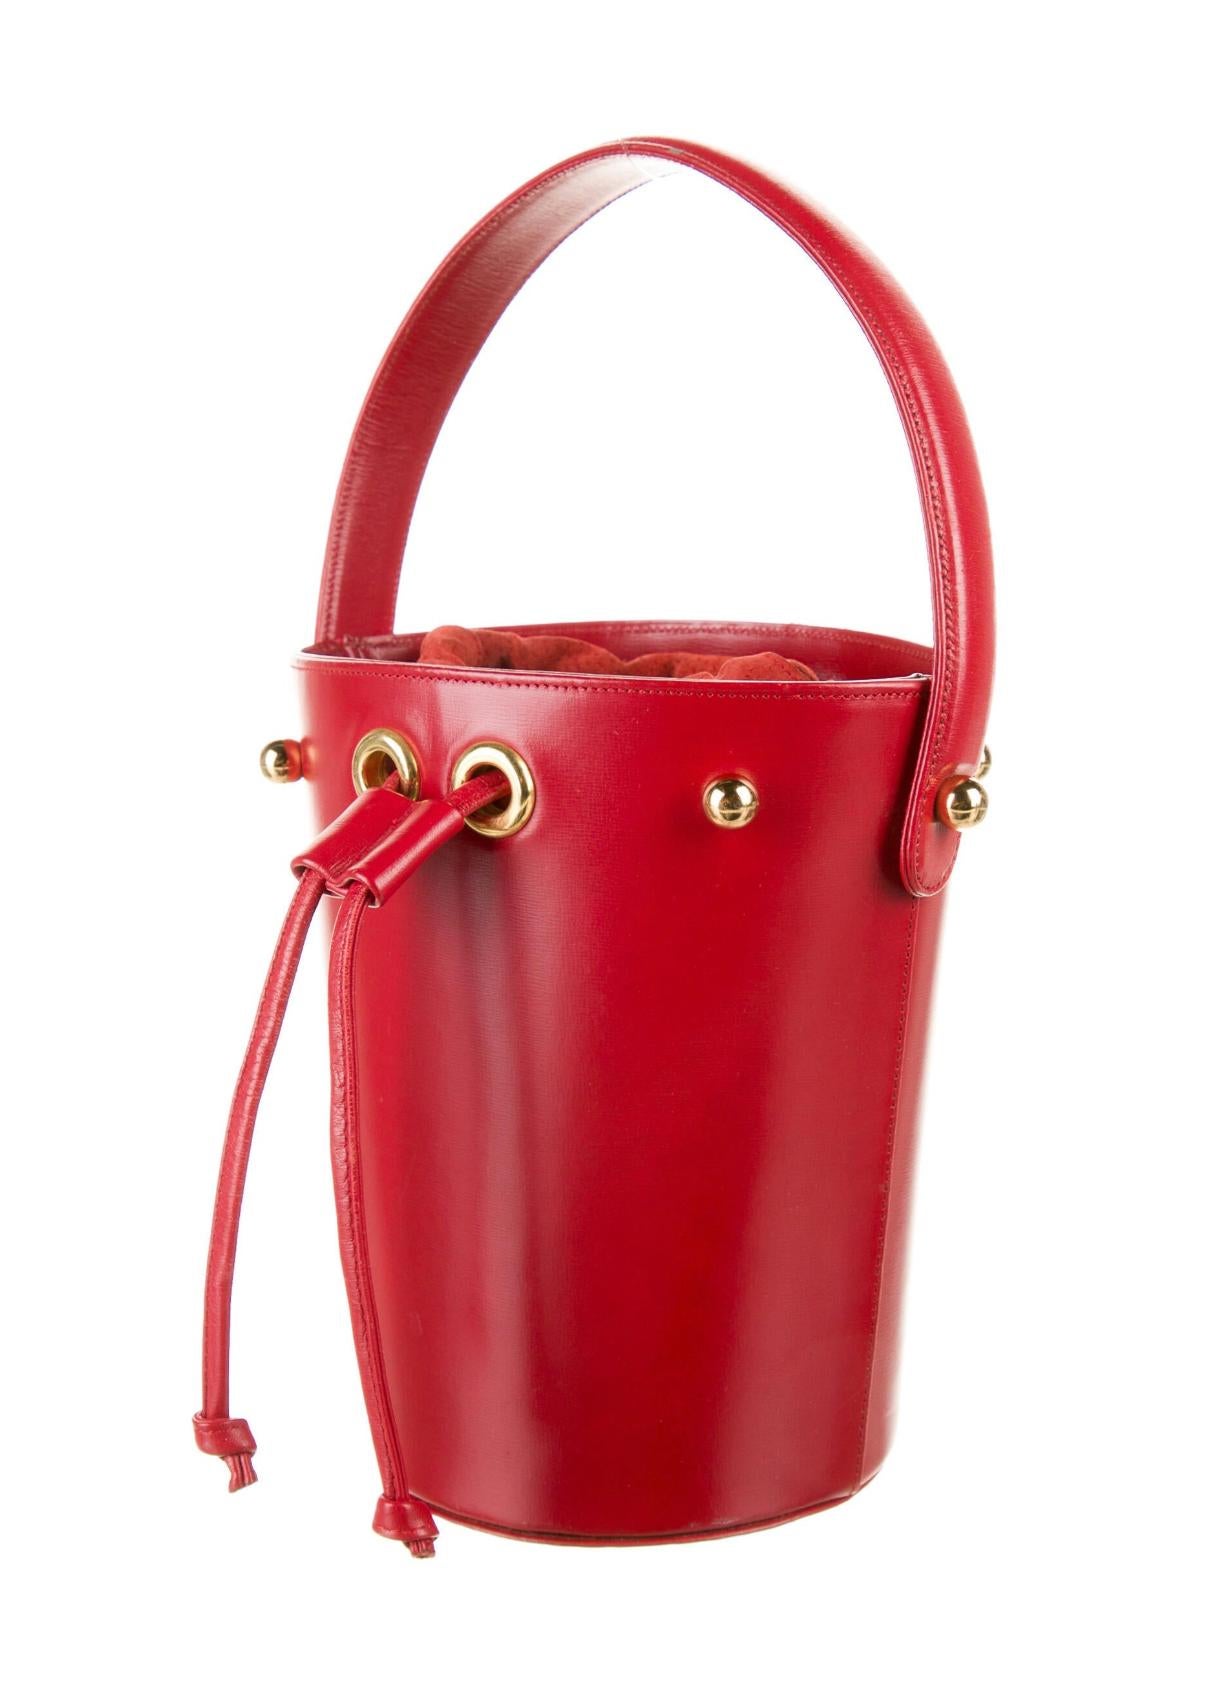 Paloma Picasso Leather Bucket Bag In Excellent Condition For Sale In Austin, TX